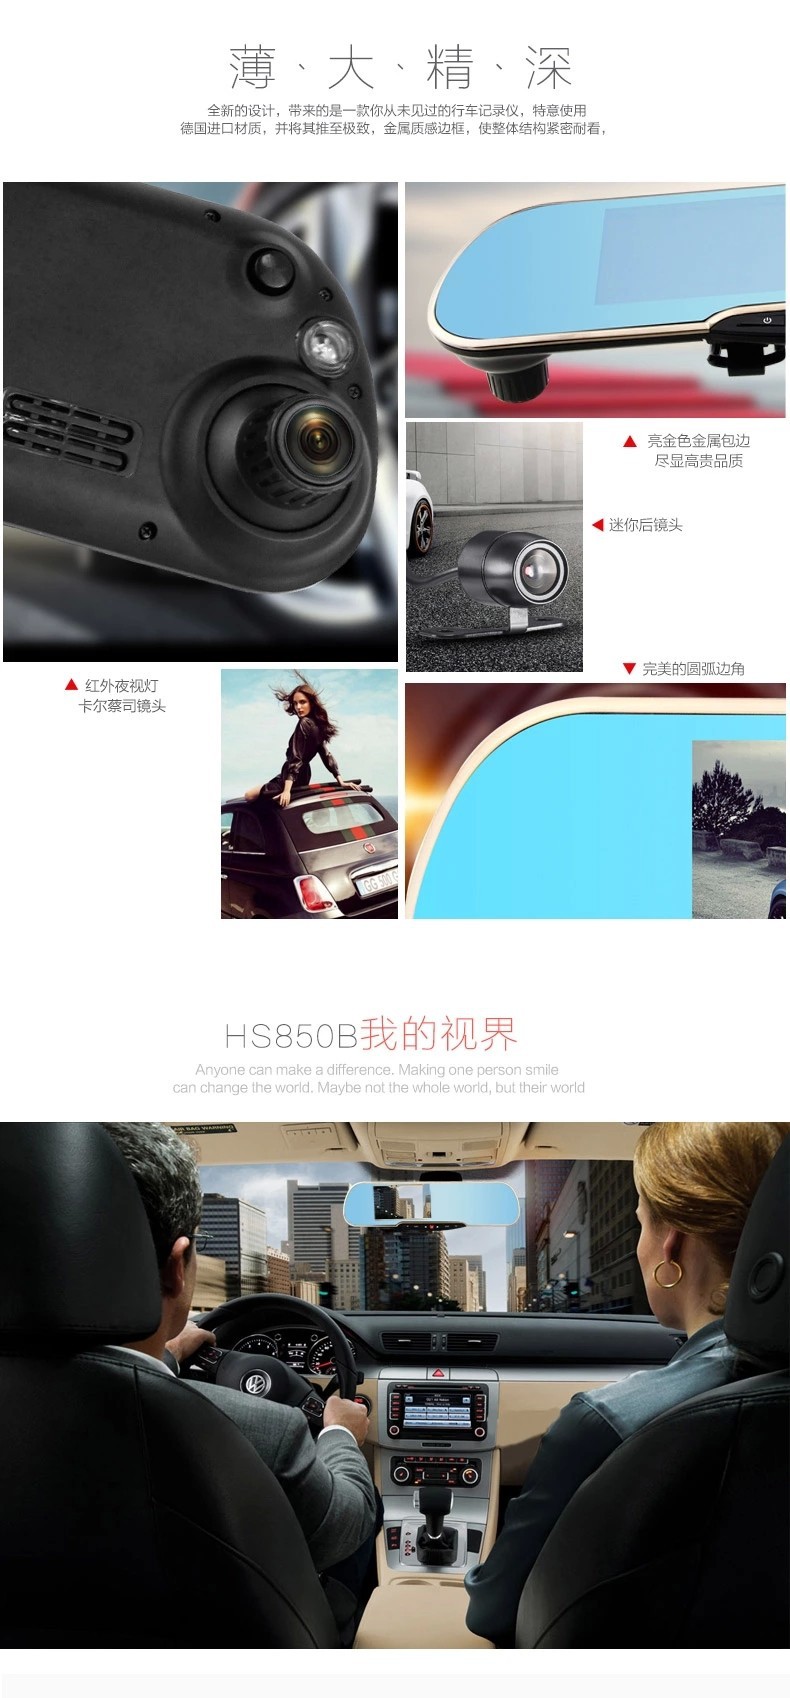 New 2015! Android Full HD dual-lens camera + HD night vision + GPS + Bluetooth + Wifi Mulfunction Car rearview mirror Car DVR (5)